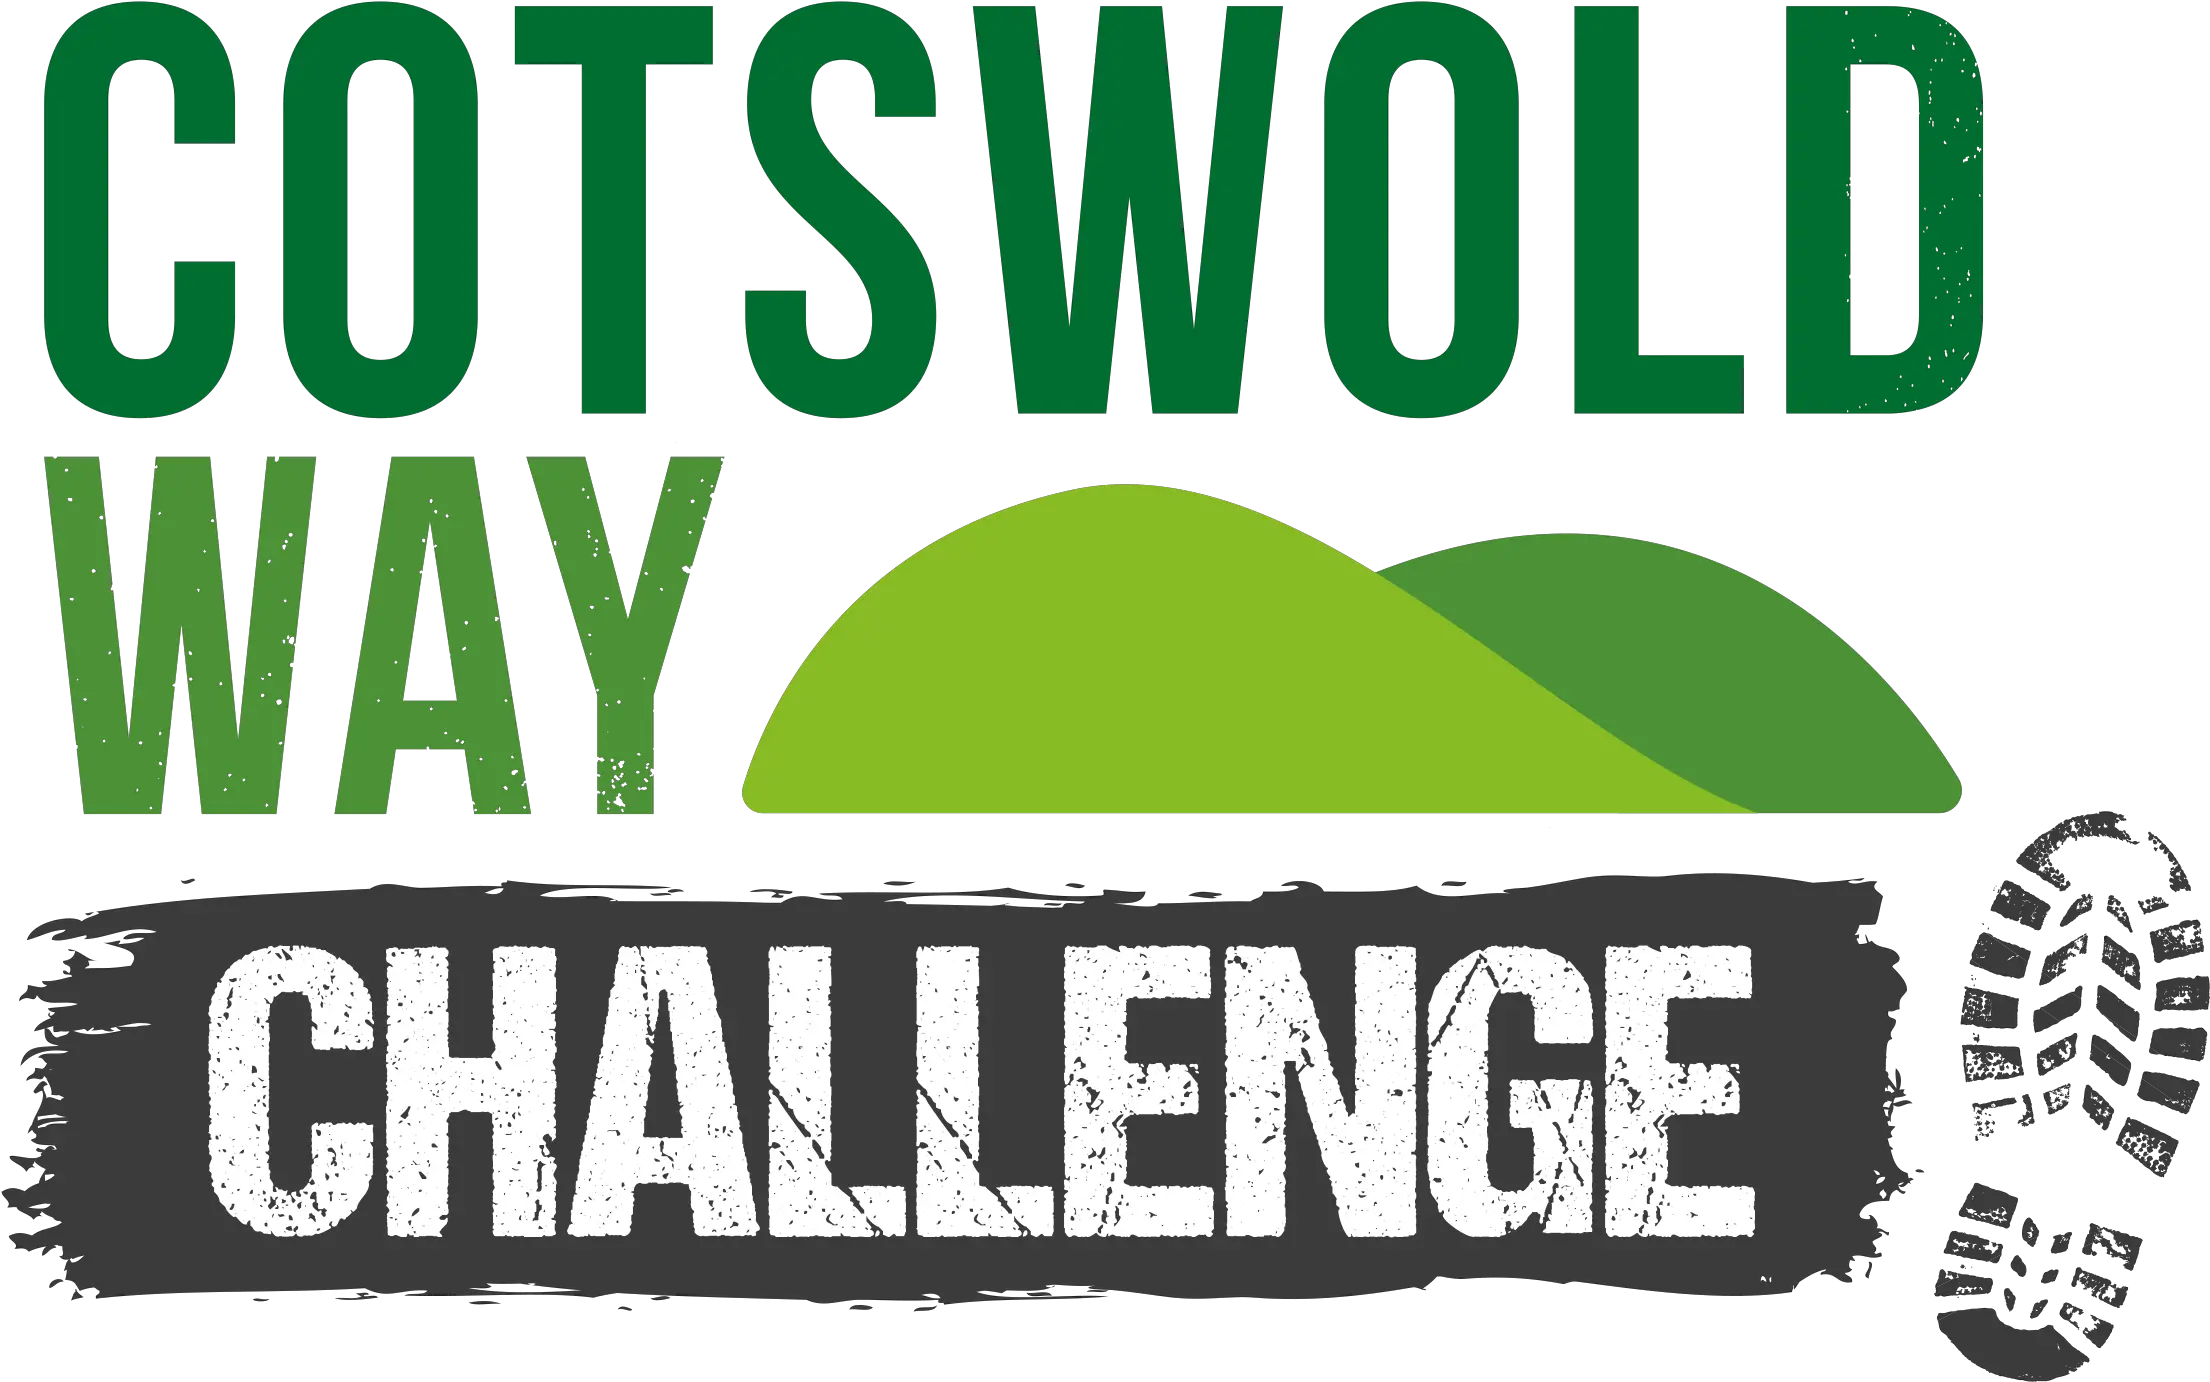 South Coast Challenge 2019 Png Image Ultra Challenge Cotswold Way Cw Logo